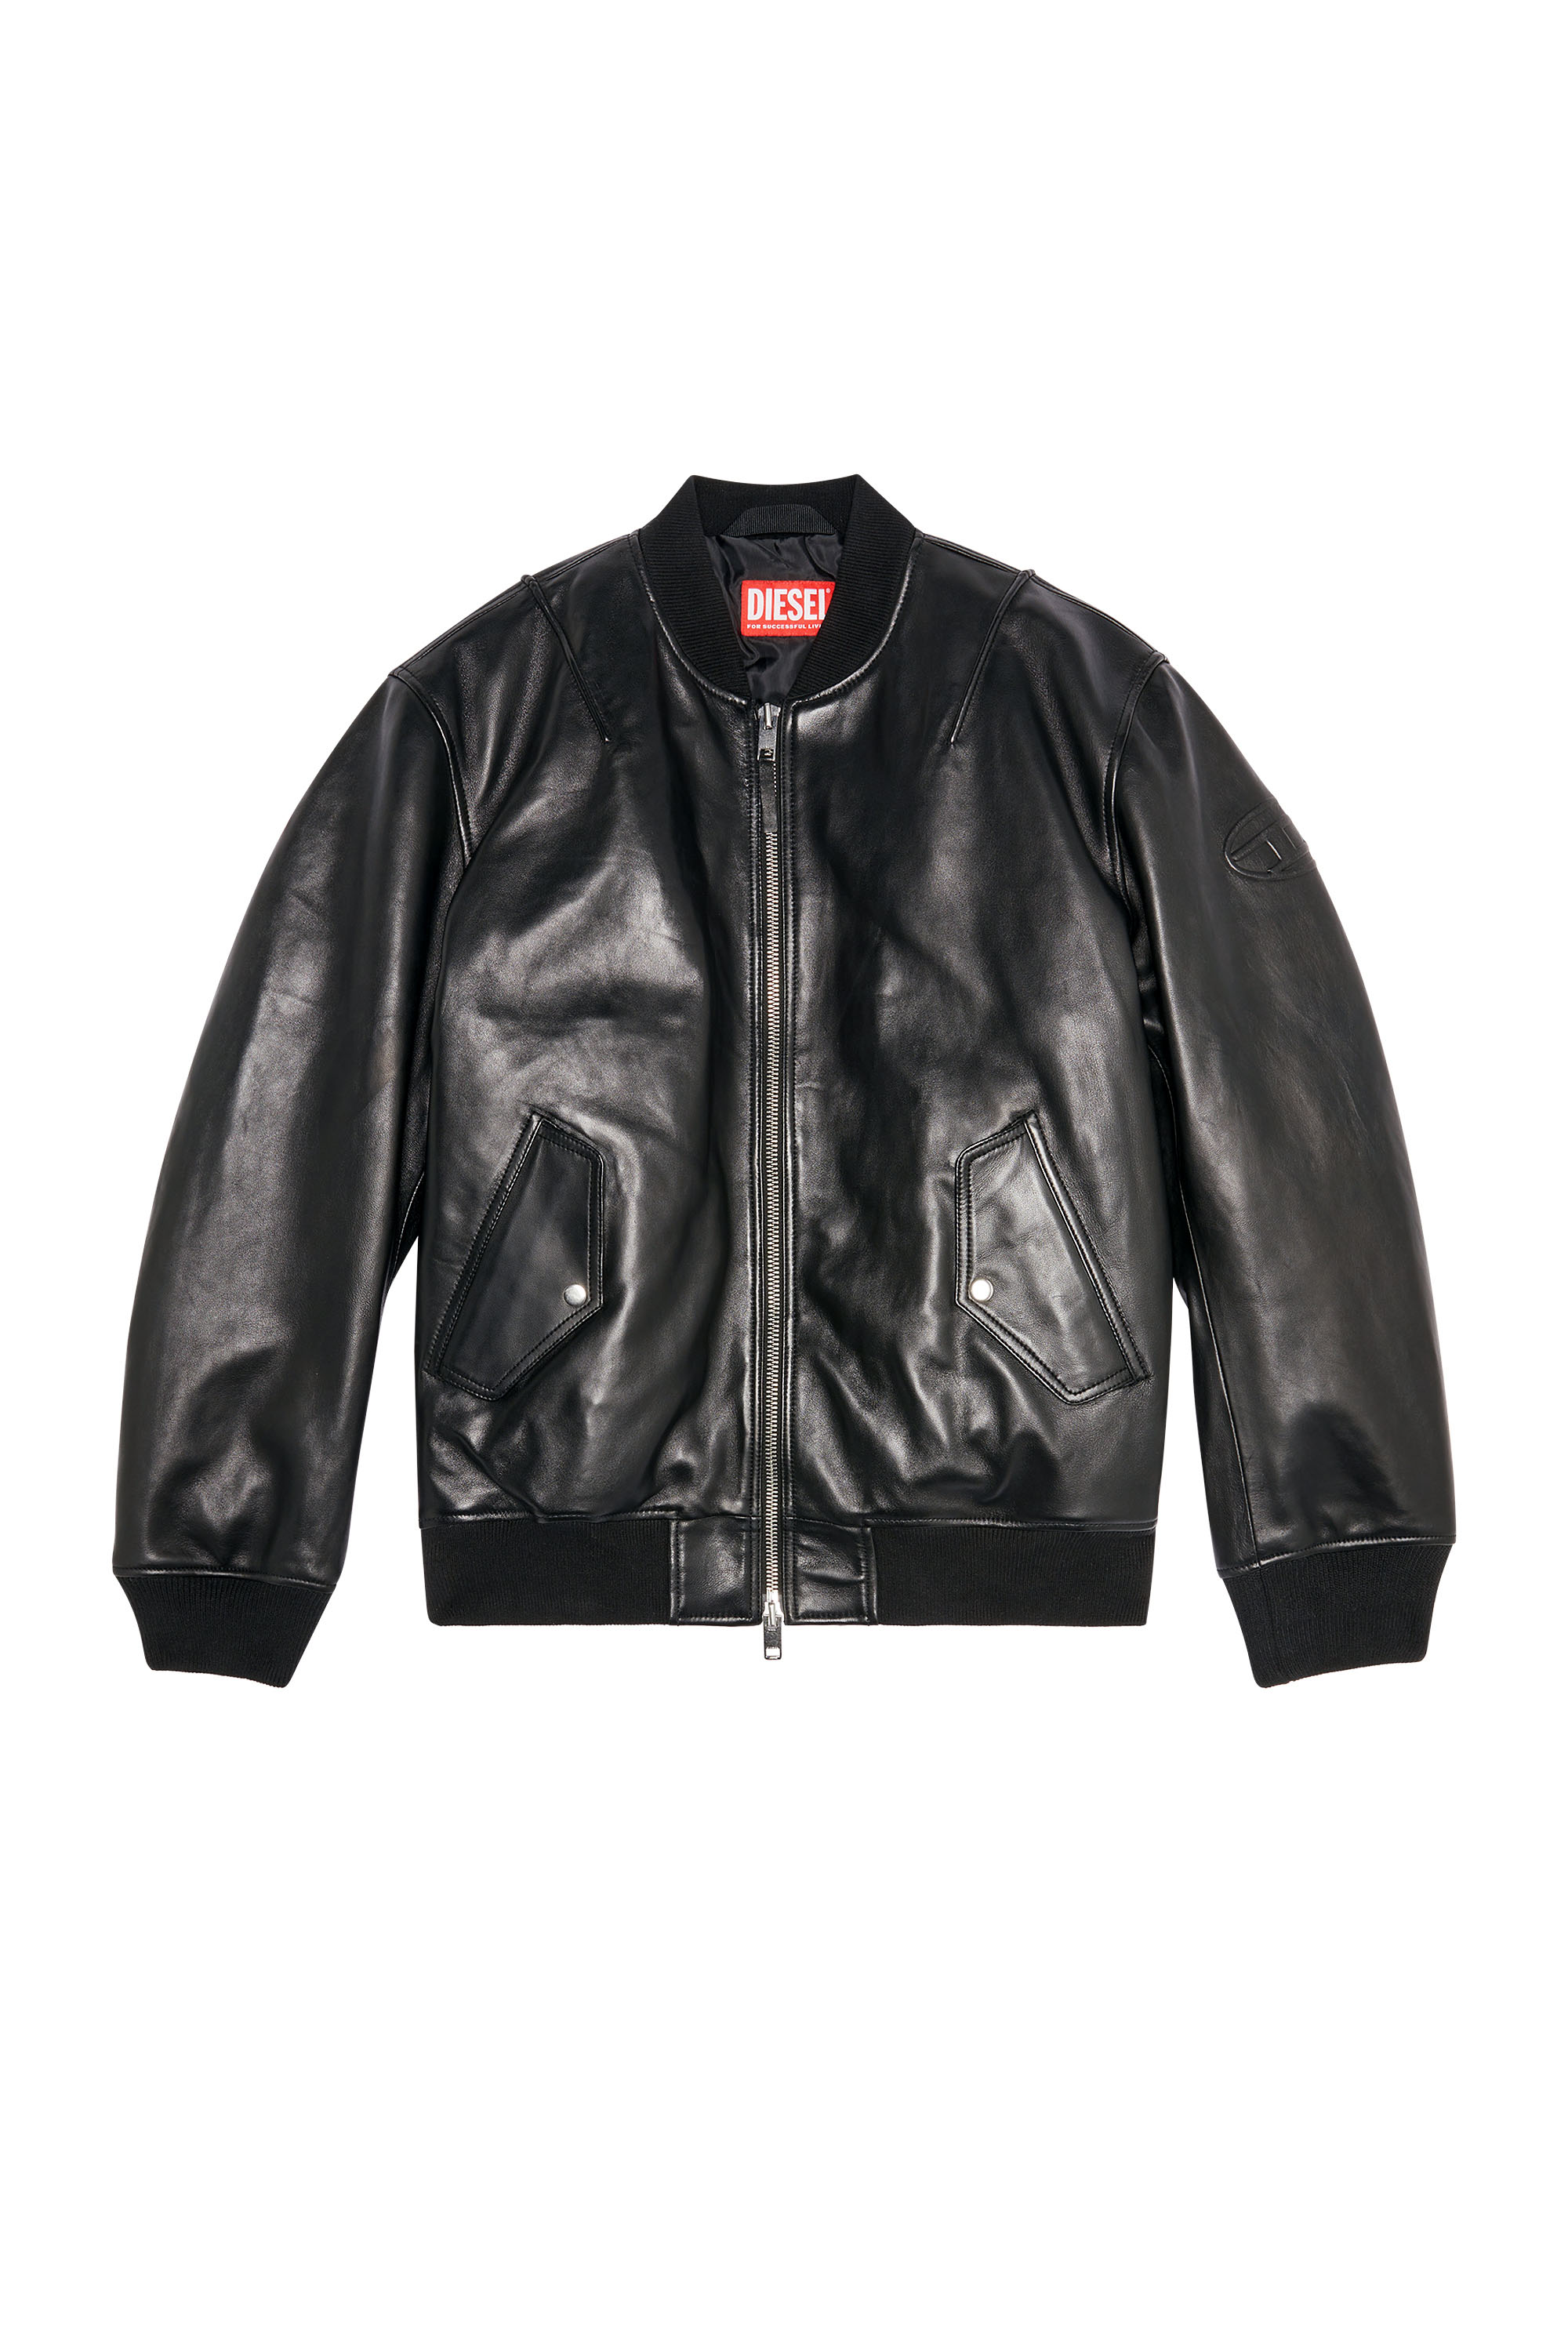 L-PRITTS, 9XX - Leather jackets